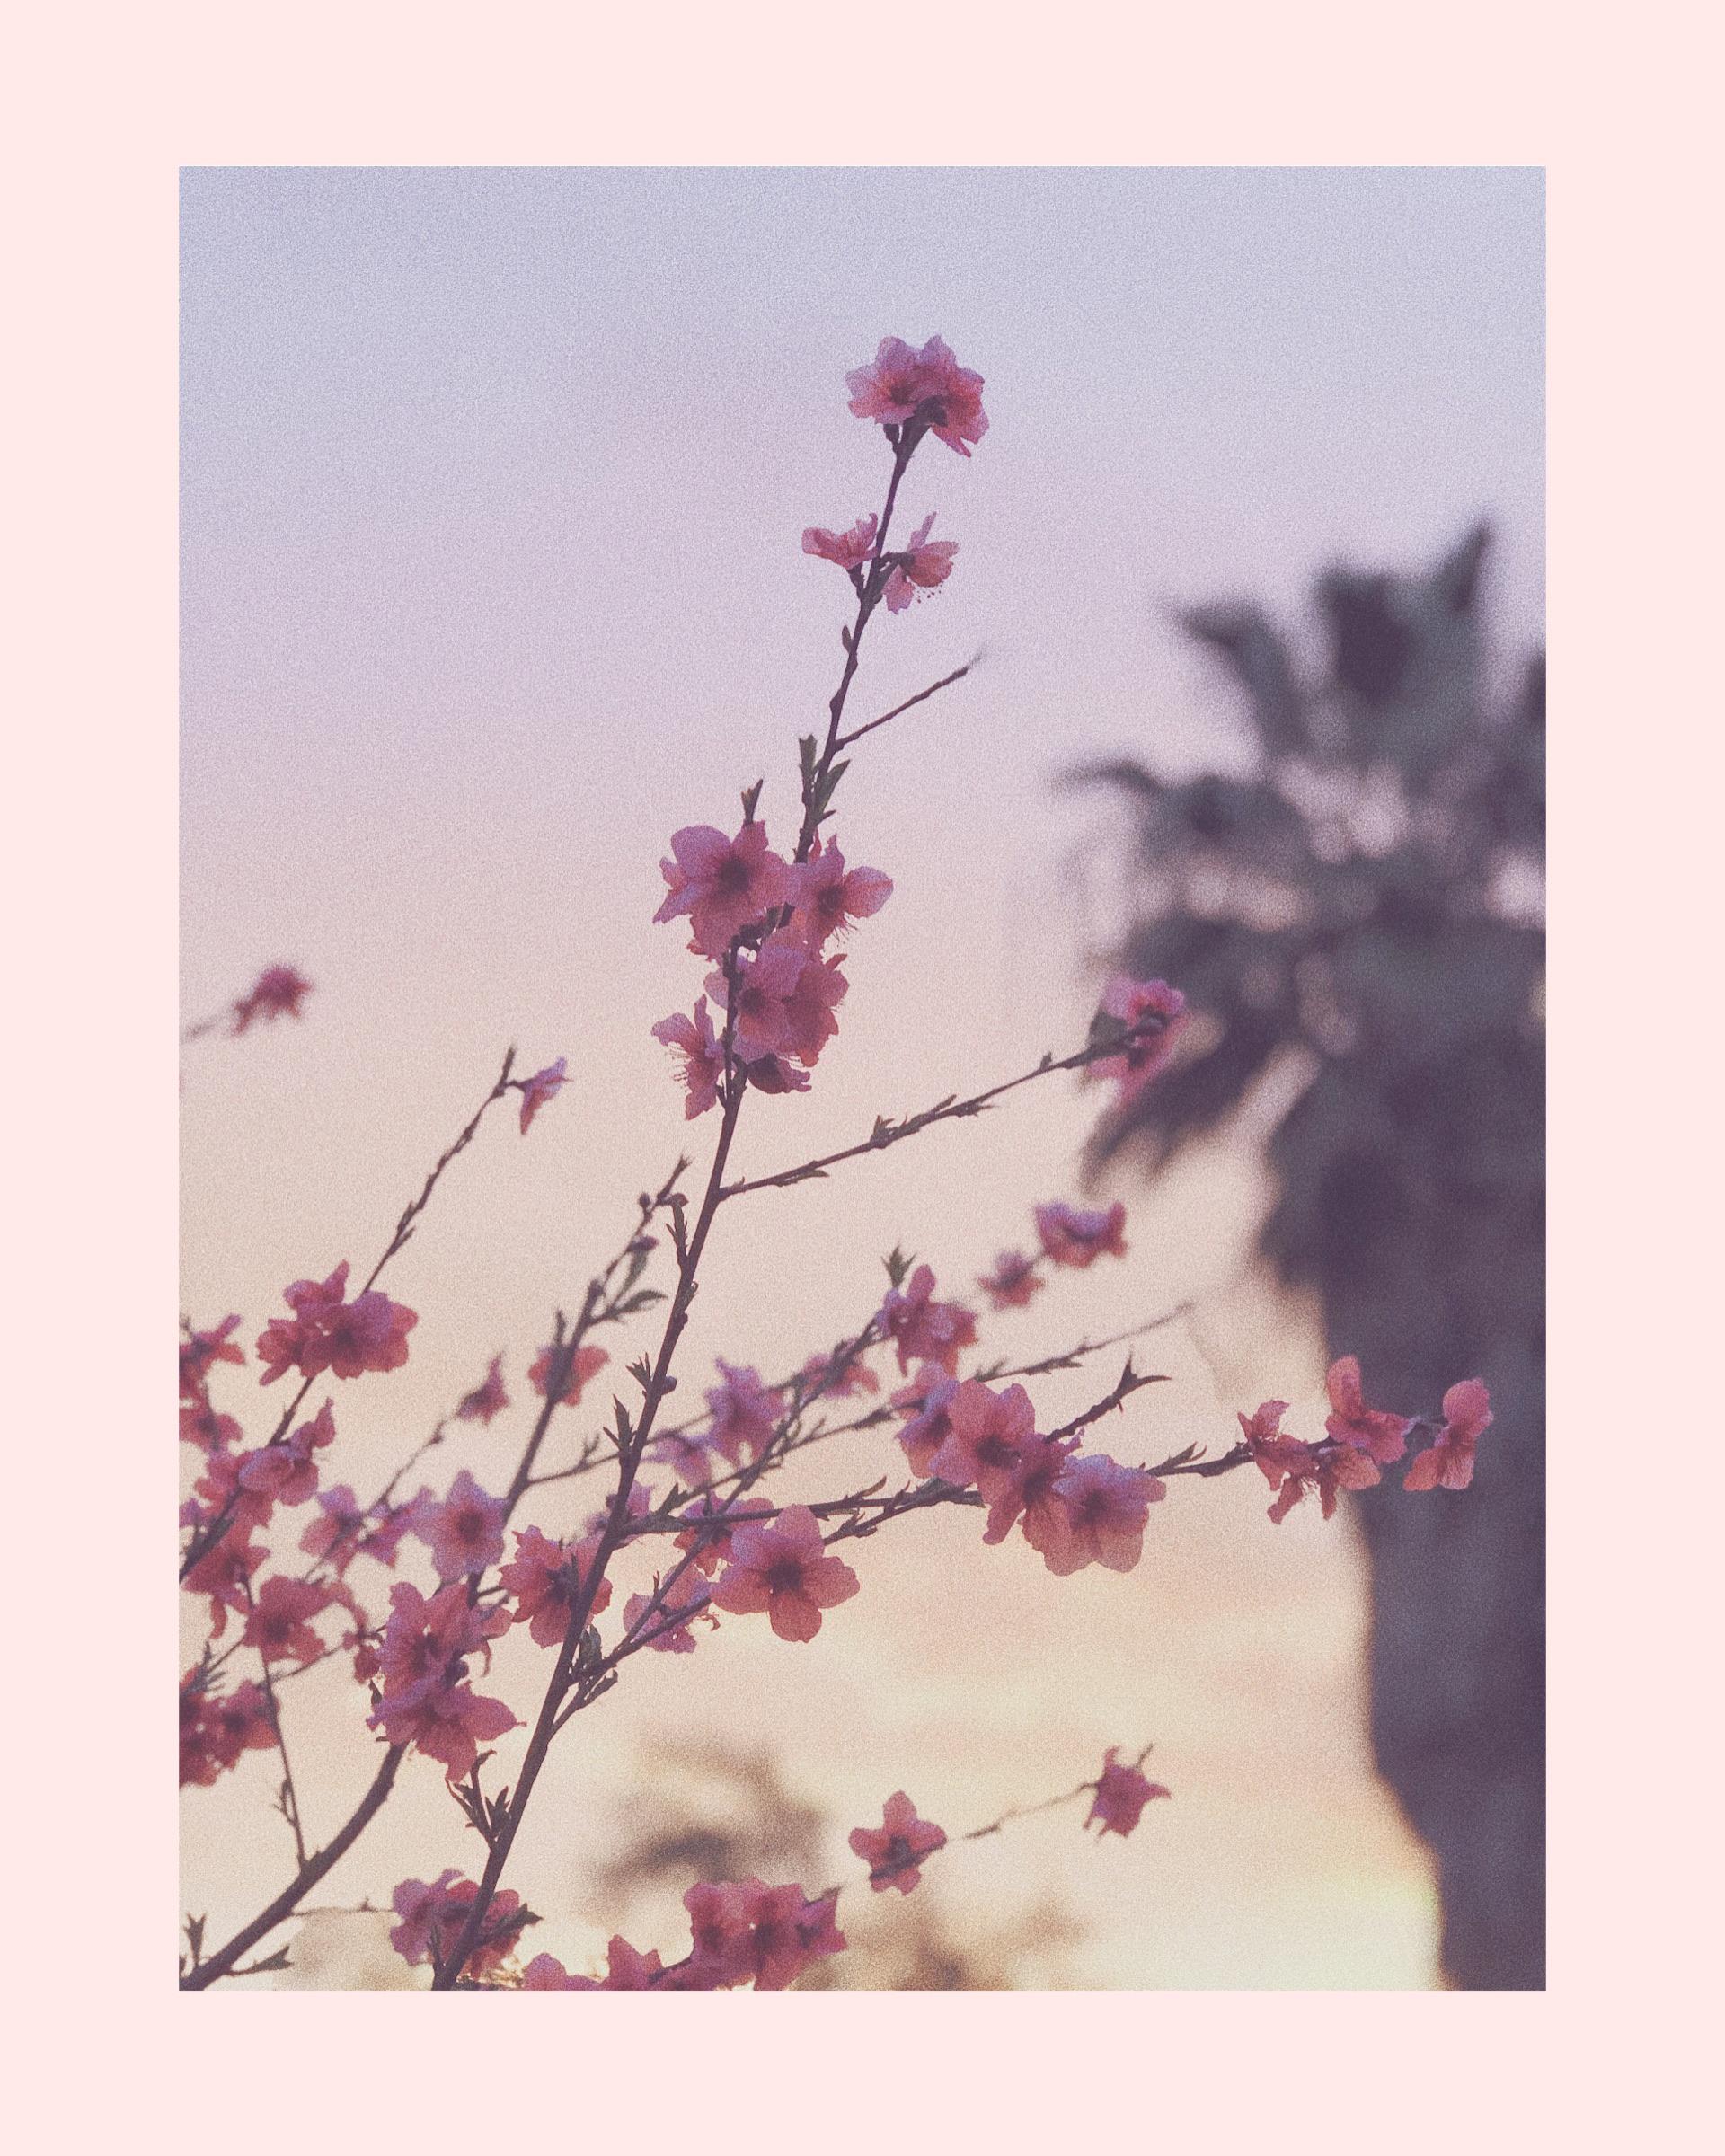 Photo I took of a cherry blossom tree? With a nice palm tree in the background. There is something off about the picture though and I can't quite put my finger on